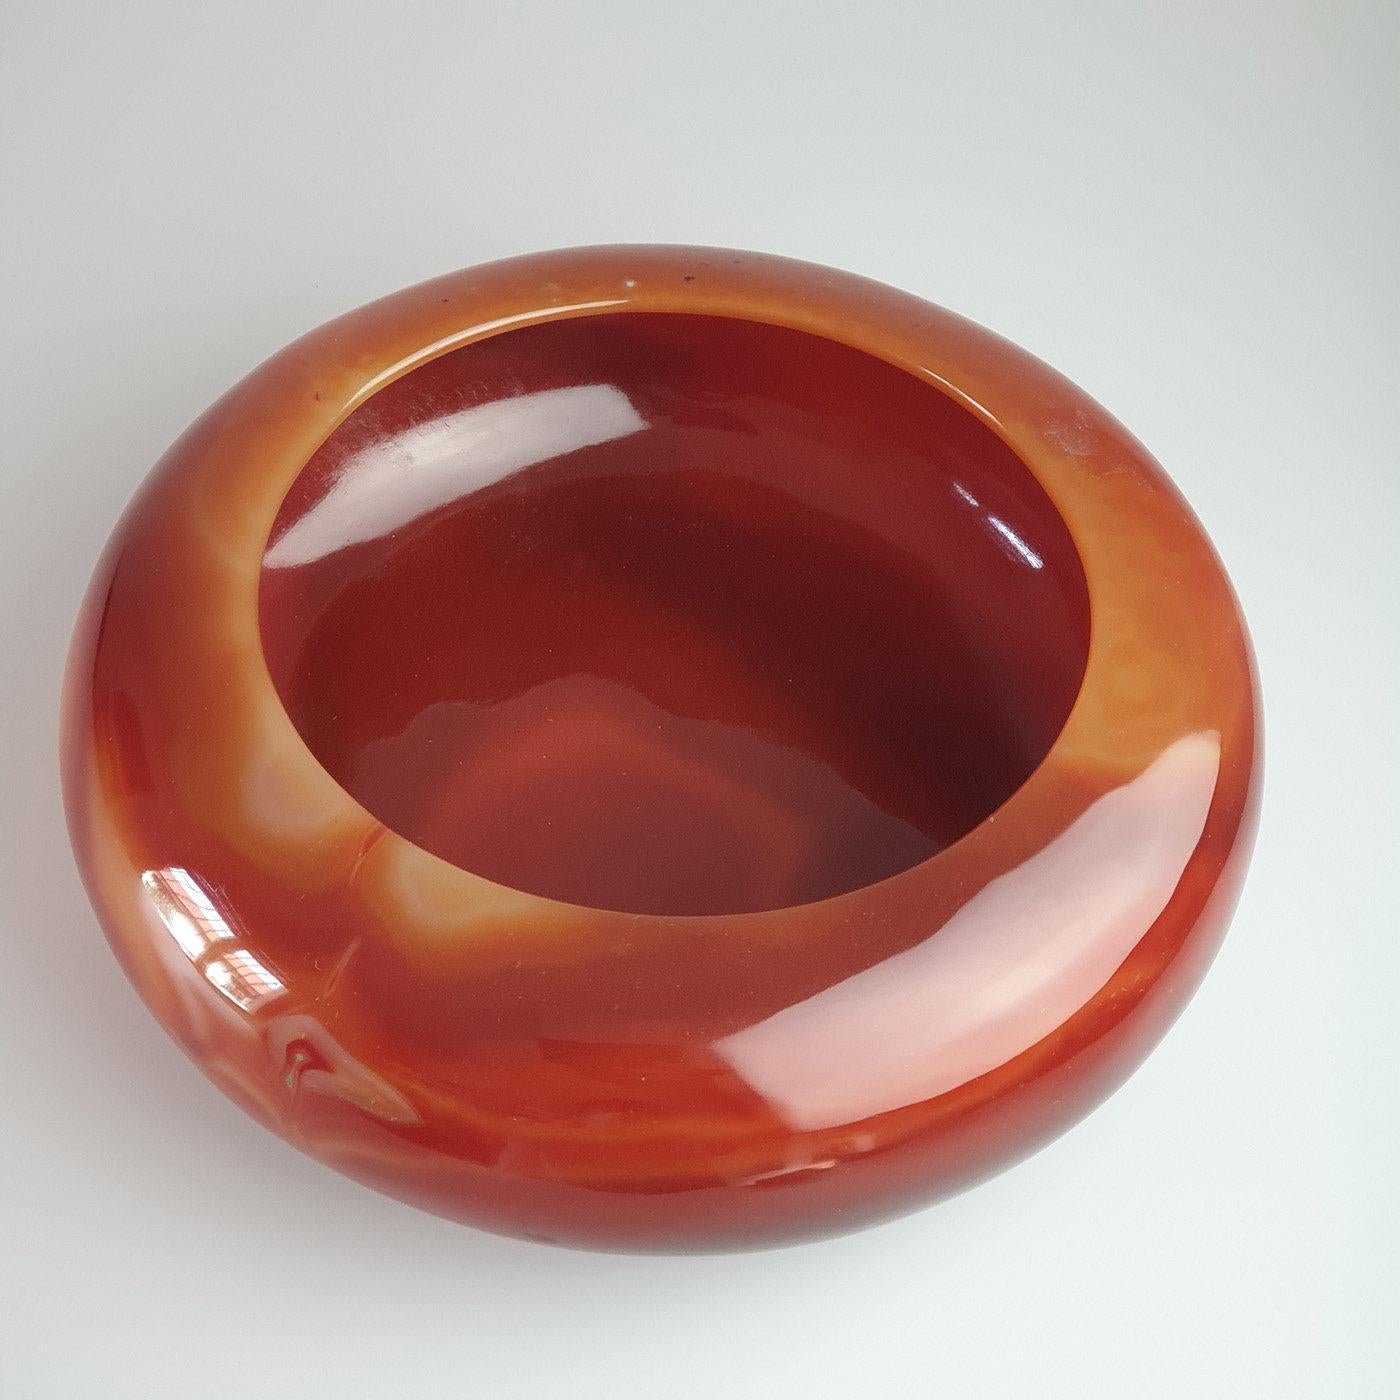 Enriched with delicately rounded edges, this empty-pocket bowl boasts a sophisticated range of colors that goes from a dark red to a pale-pink. Manufactured from a single piece of clear carnelian agate and adorned with a polished finish for a